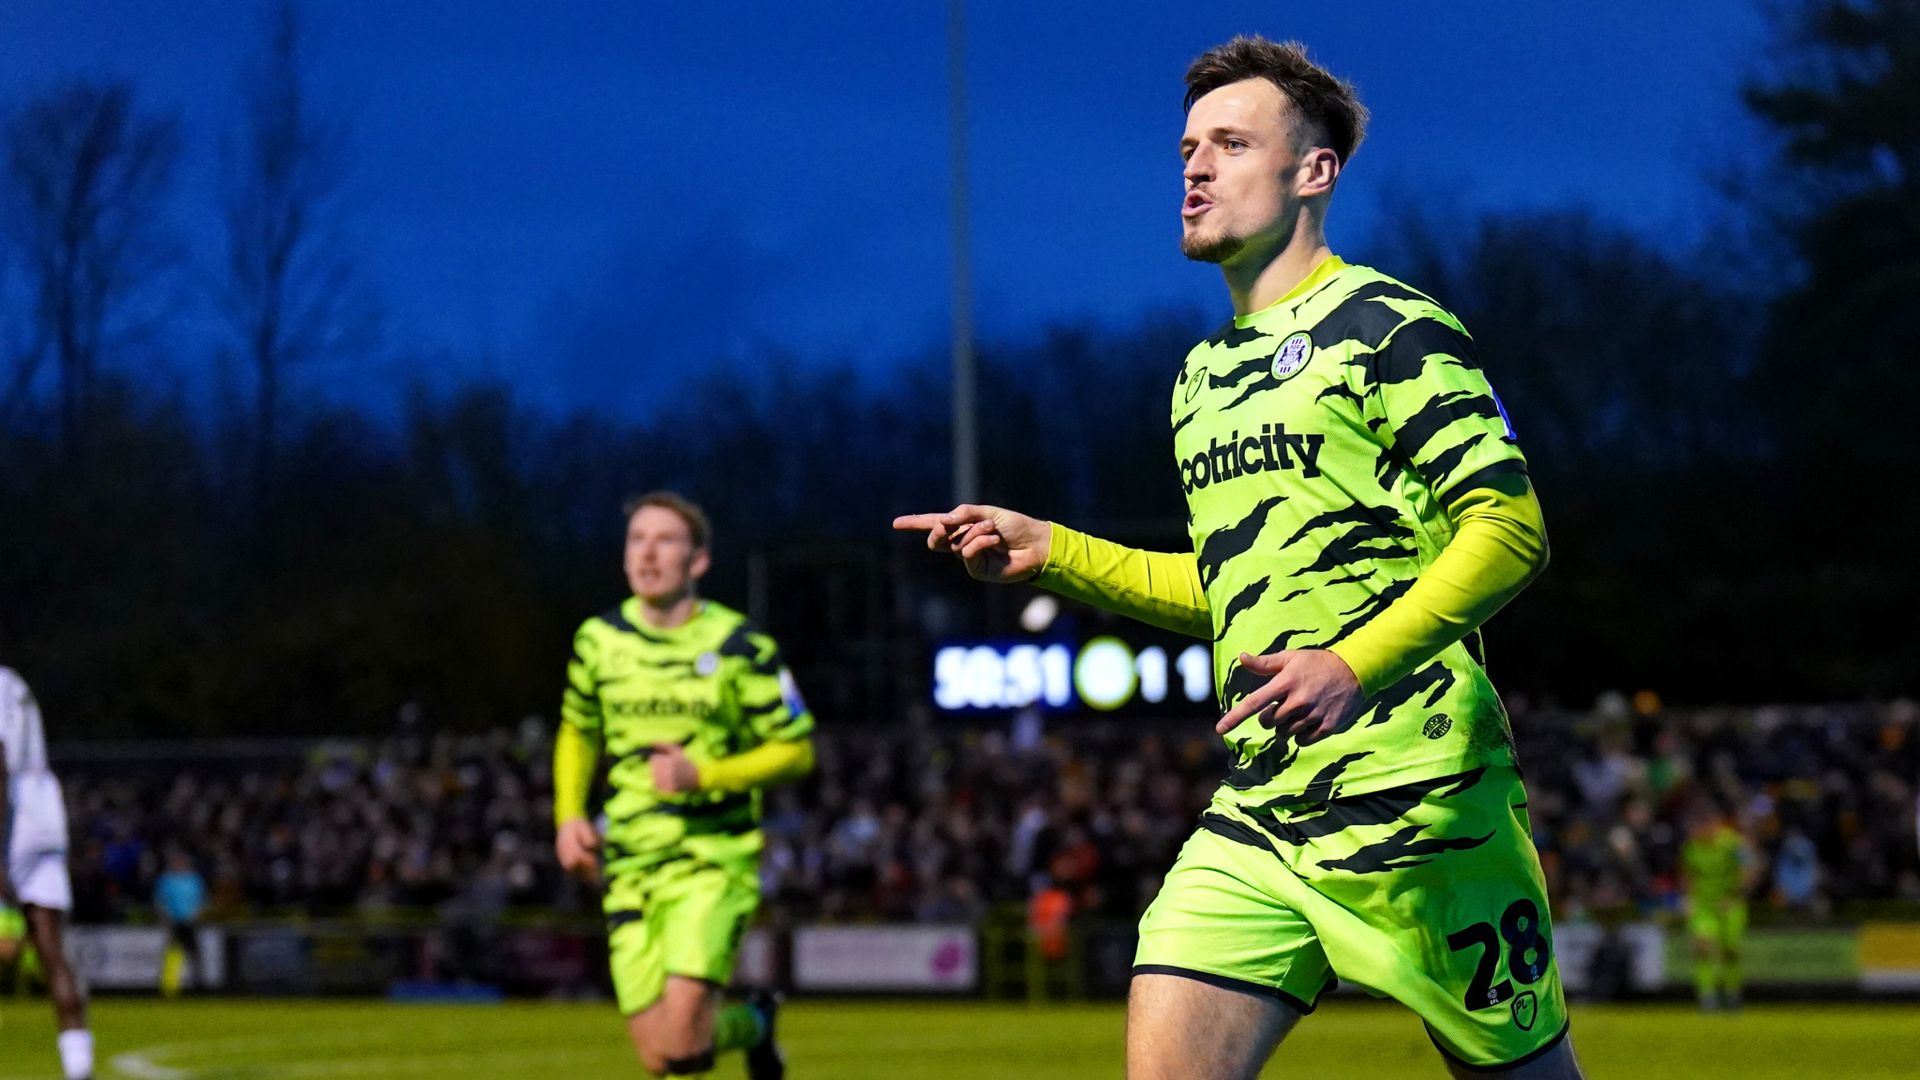 FA Cup: Forest Green hold off Alvechurch | Chesterfield shock Wimbledon